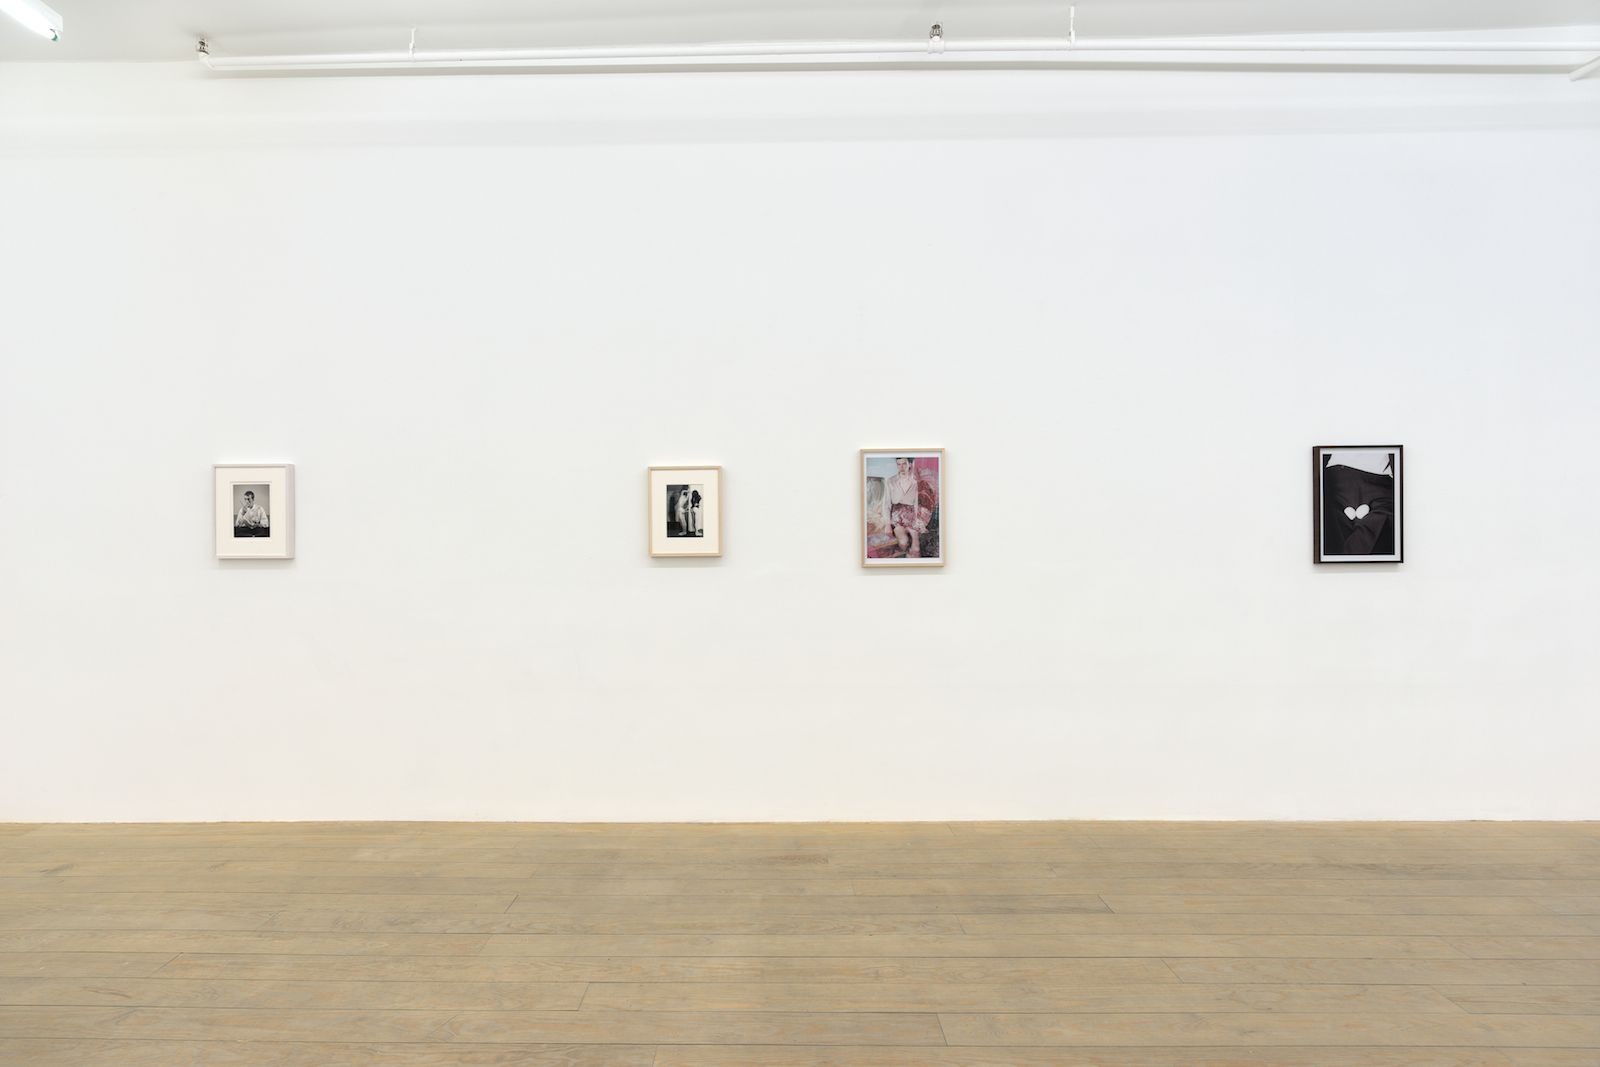 Spain & 42nd St., 2014-2015, installation view, Foxy Production, New York